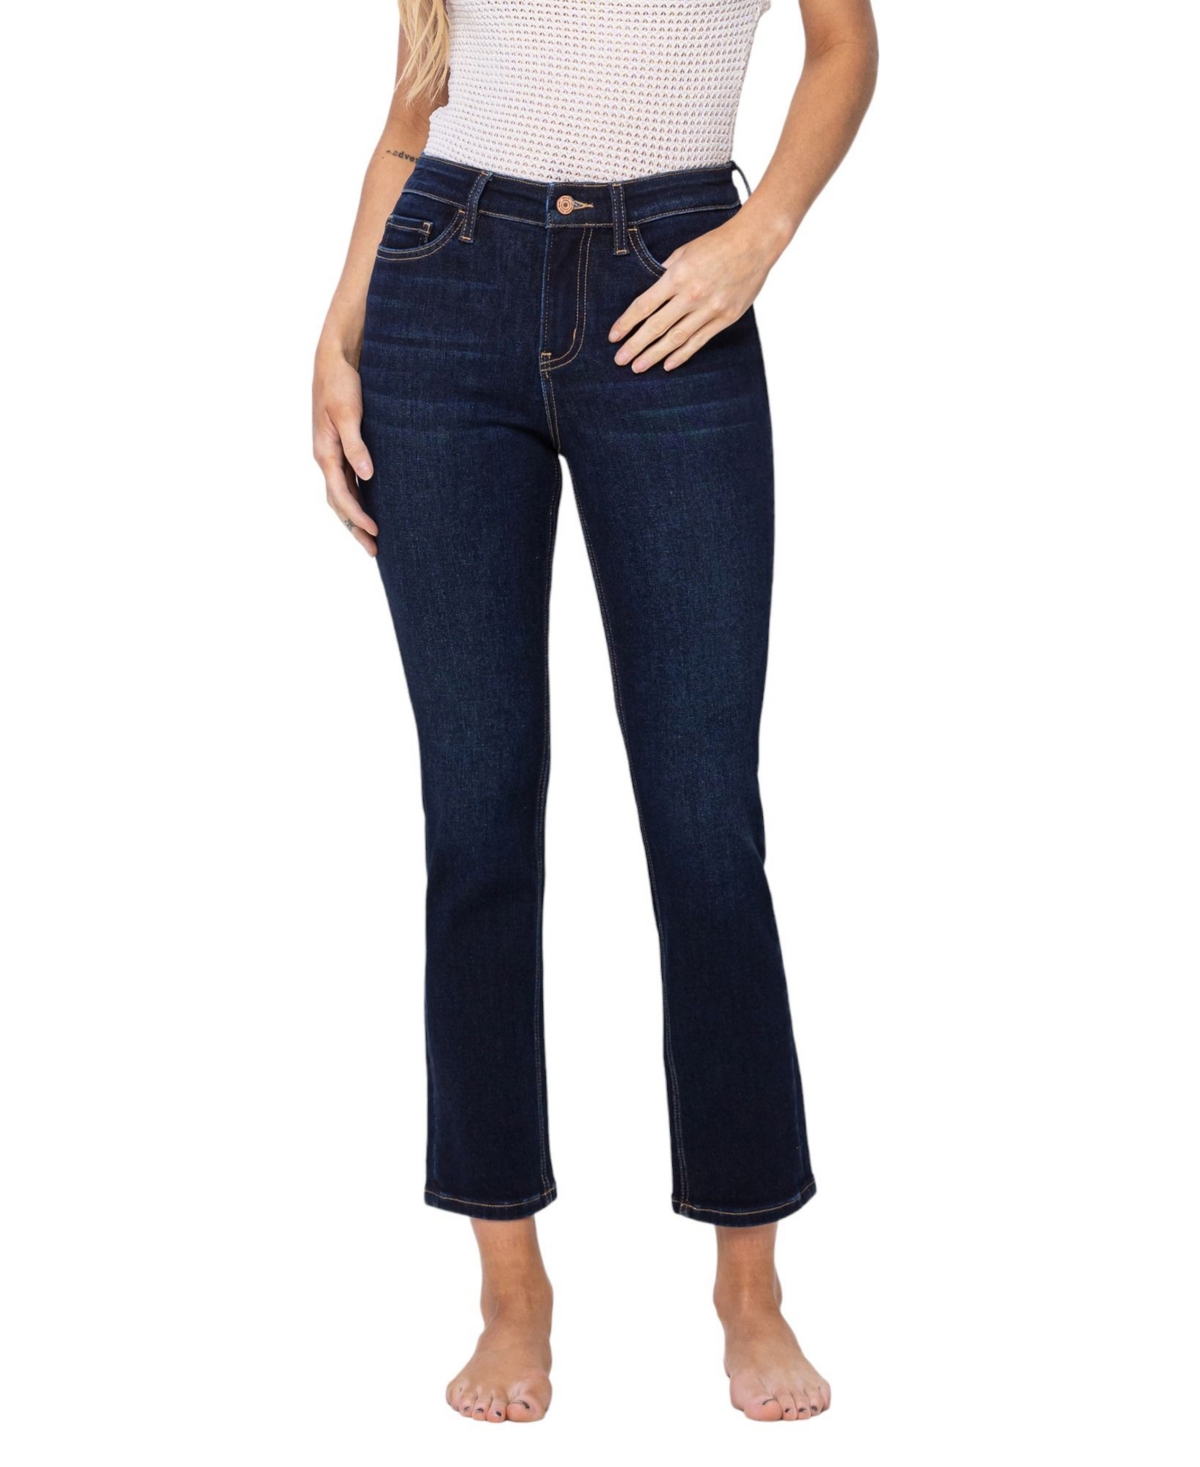 Women's High Rise Ankle Slim Straight Jeans - Enraptured blue